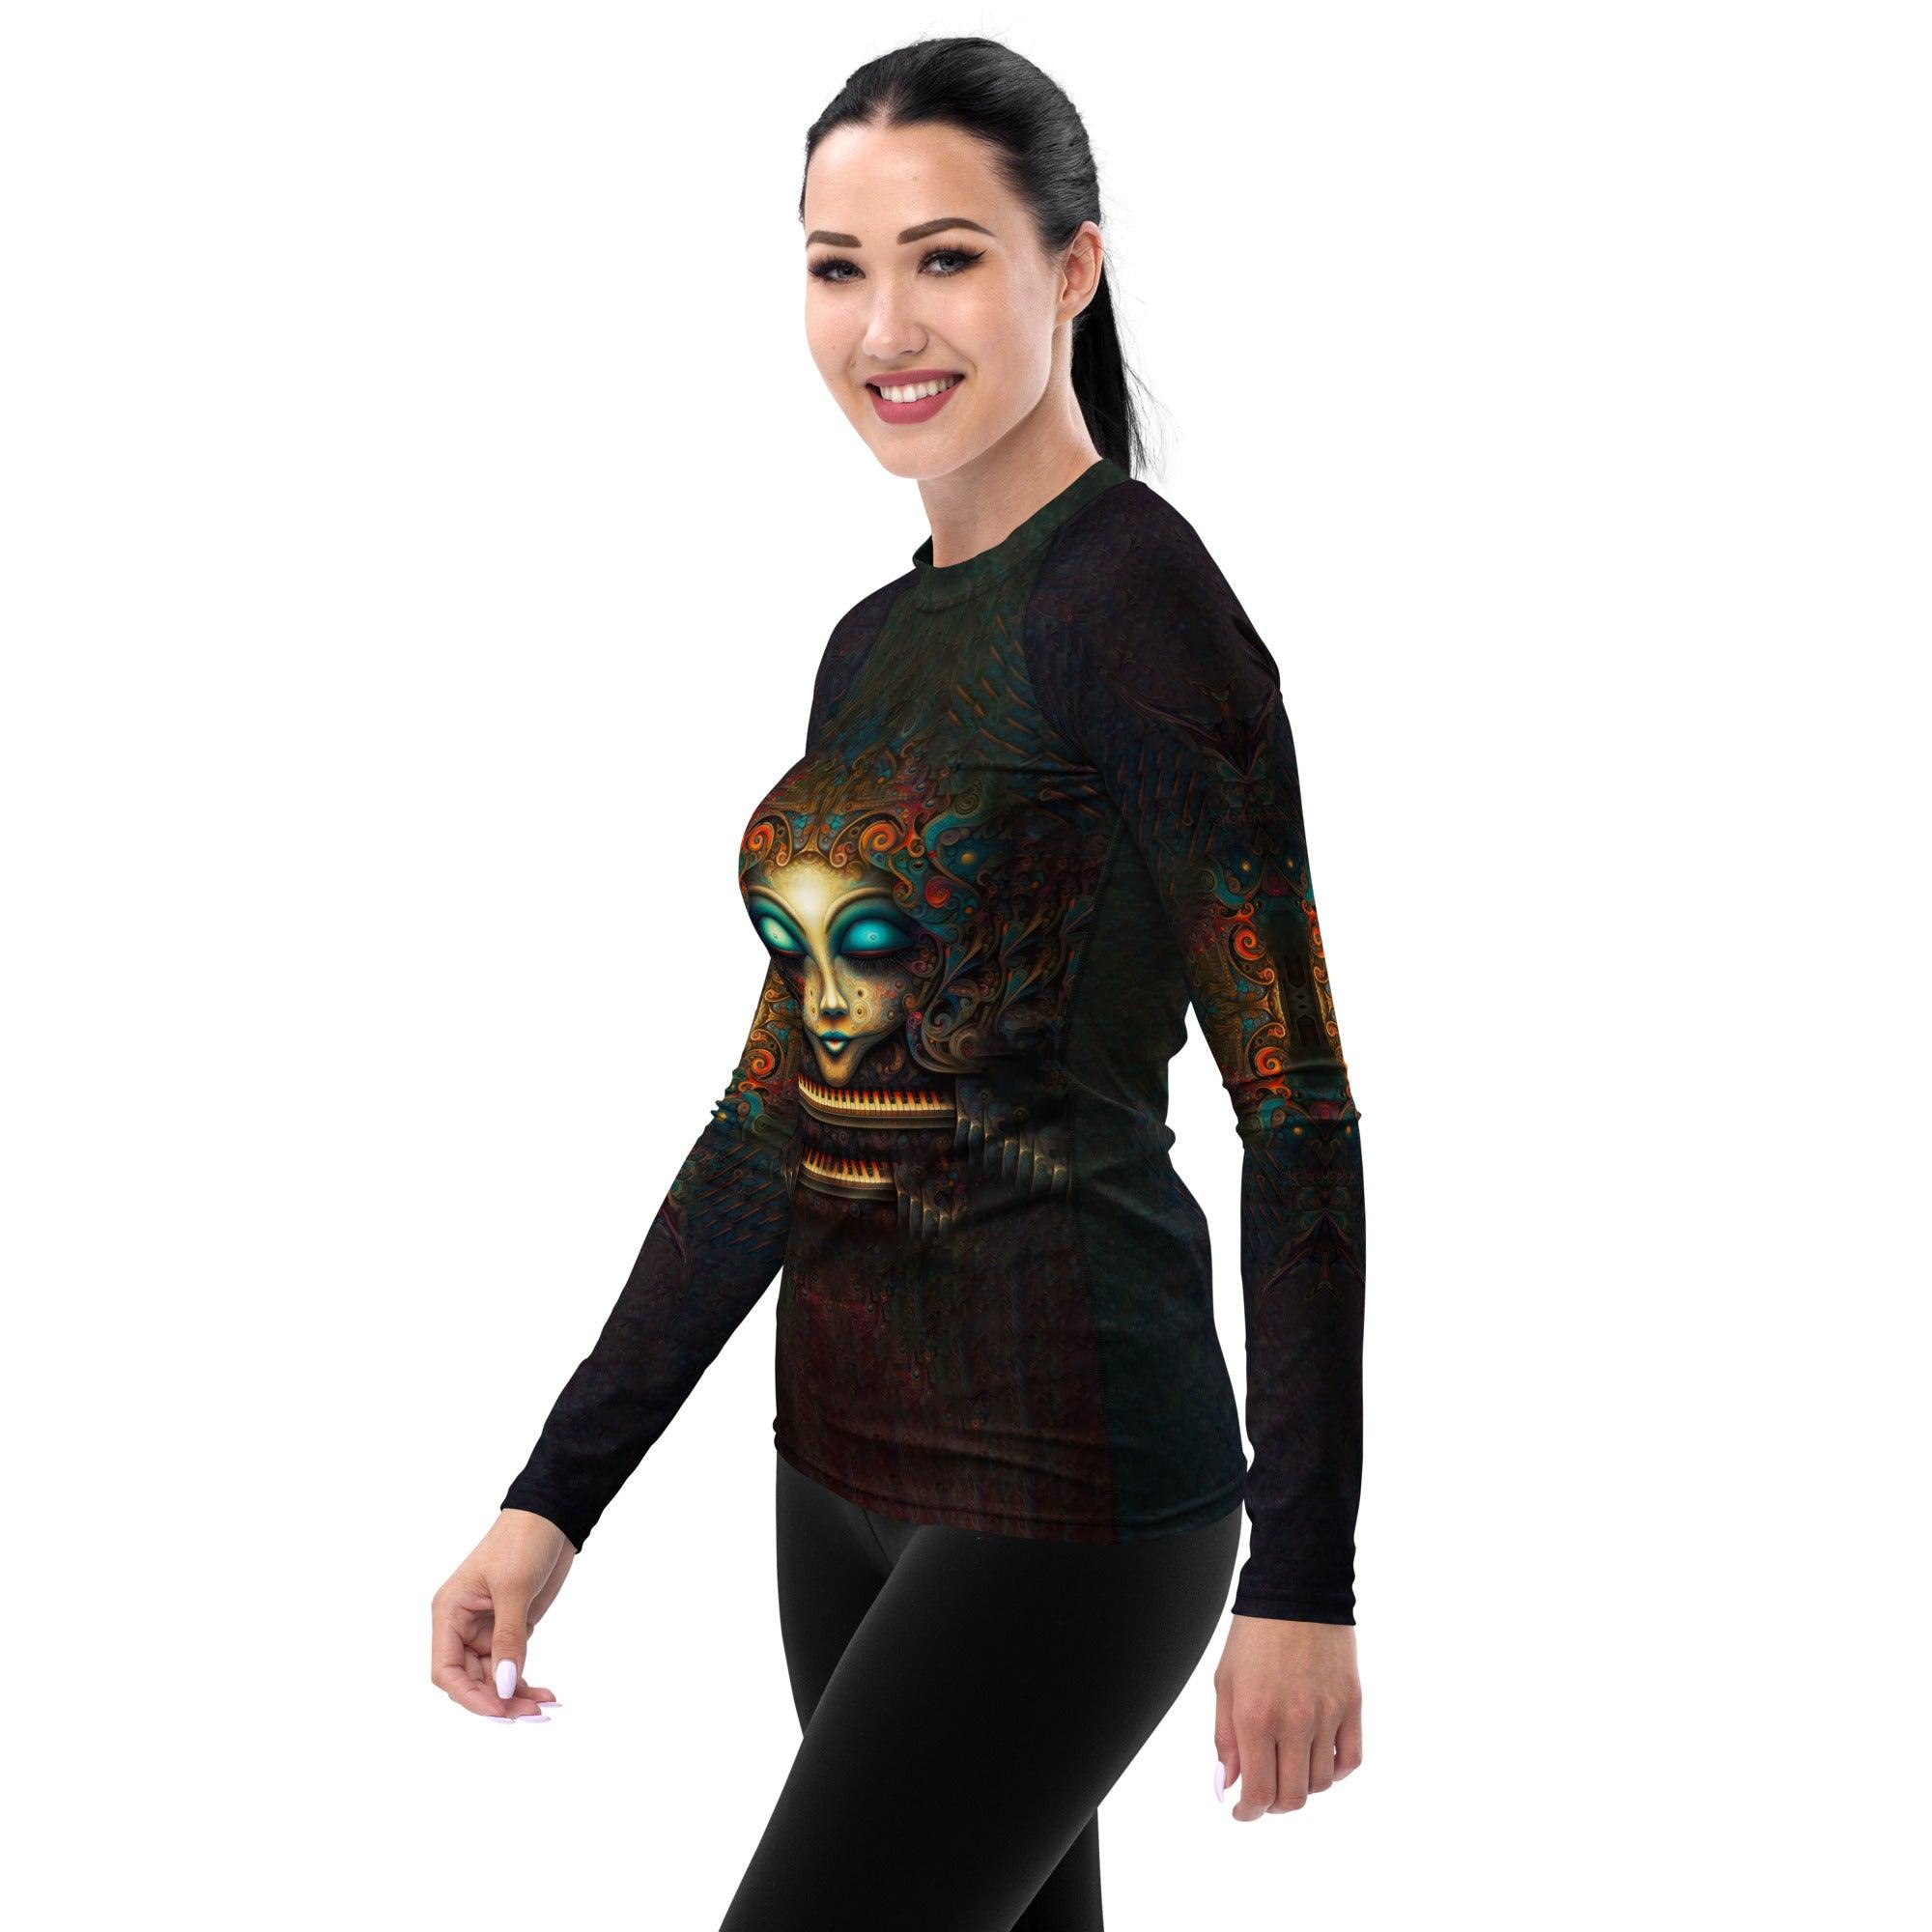 Vintage Visions rash guard for women in action surfing.